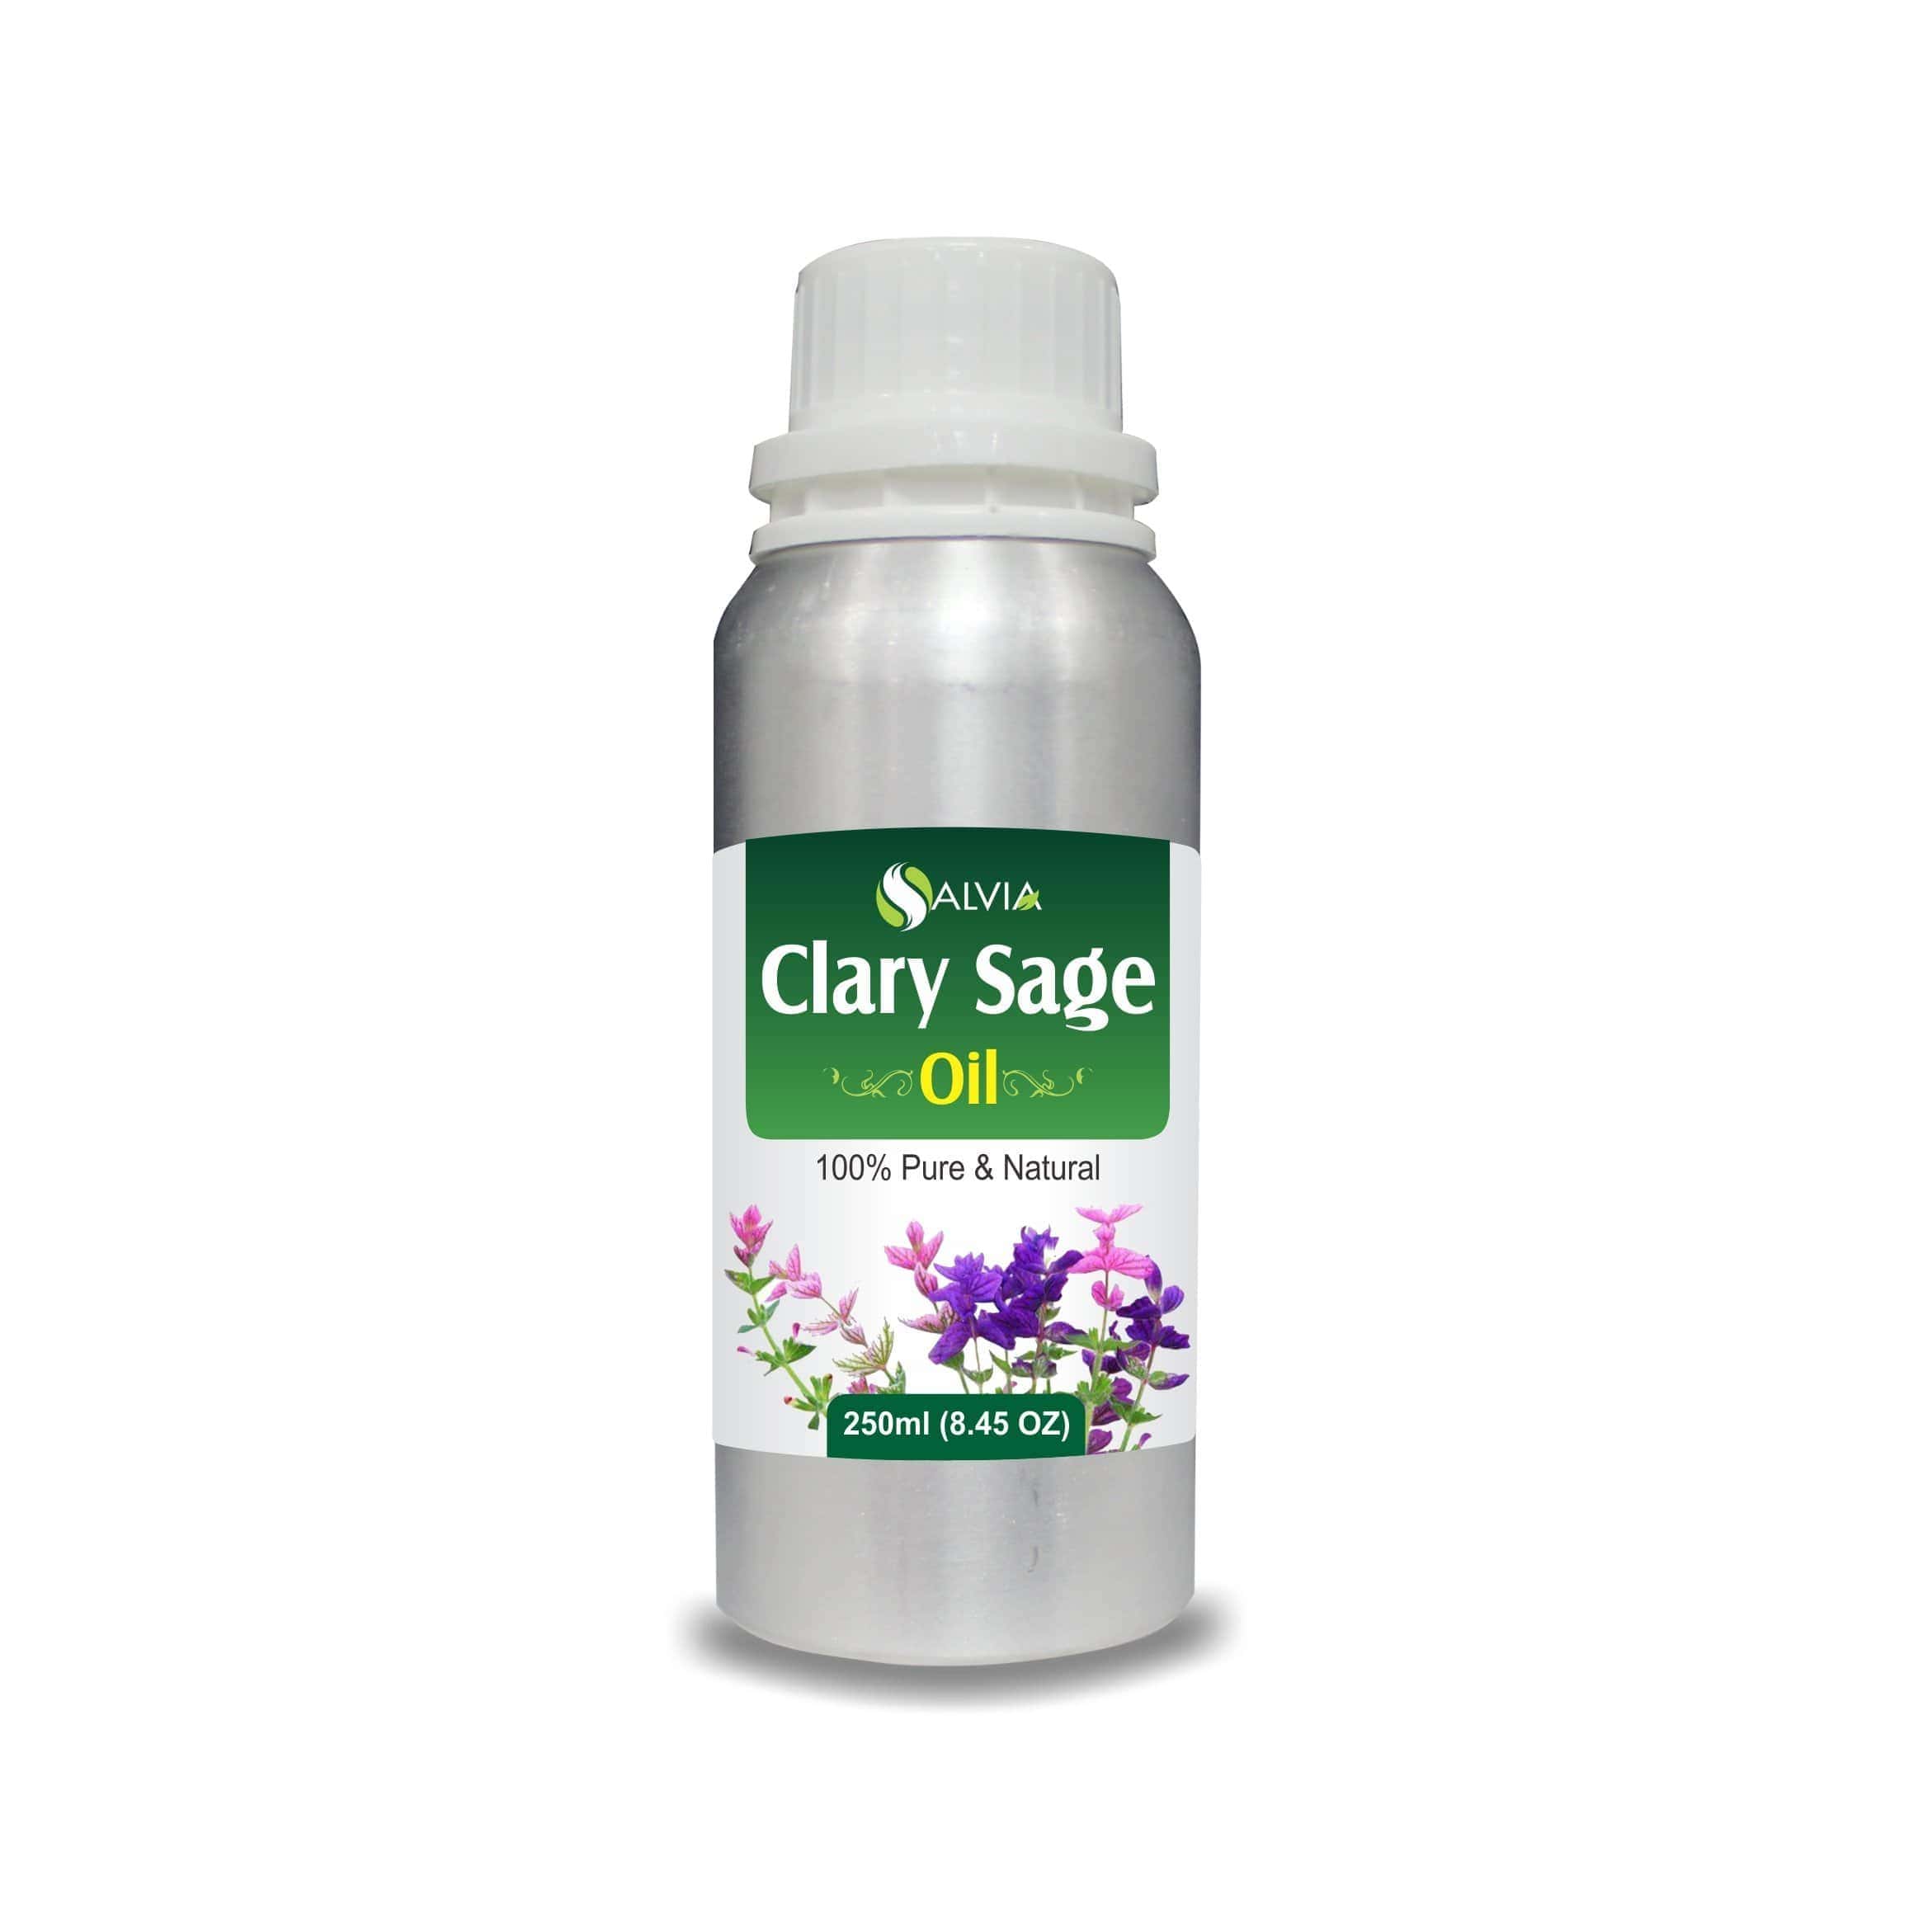 clary sage oil benefits